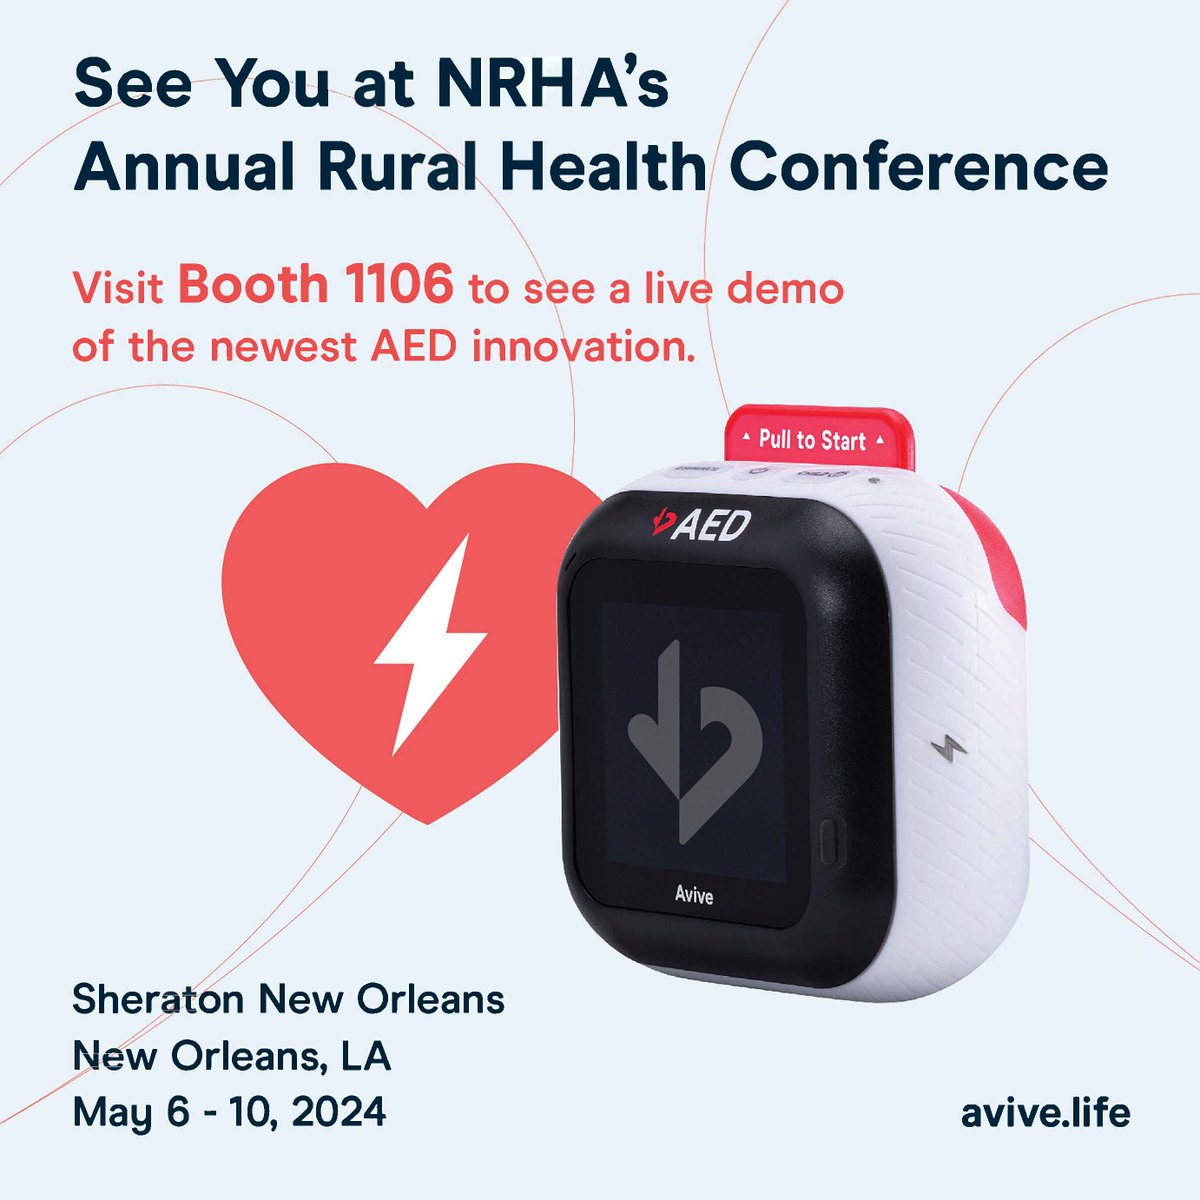 We're excited to be a part of the conversation at the @ruralhealth Association's Annual Rural Health Conference in New Orleans. Come see us! 

#publichealth #ruralhealth #EMS